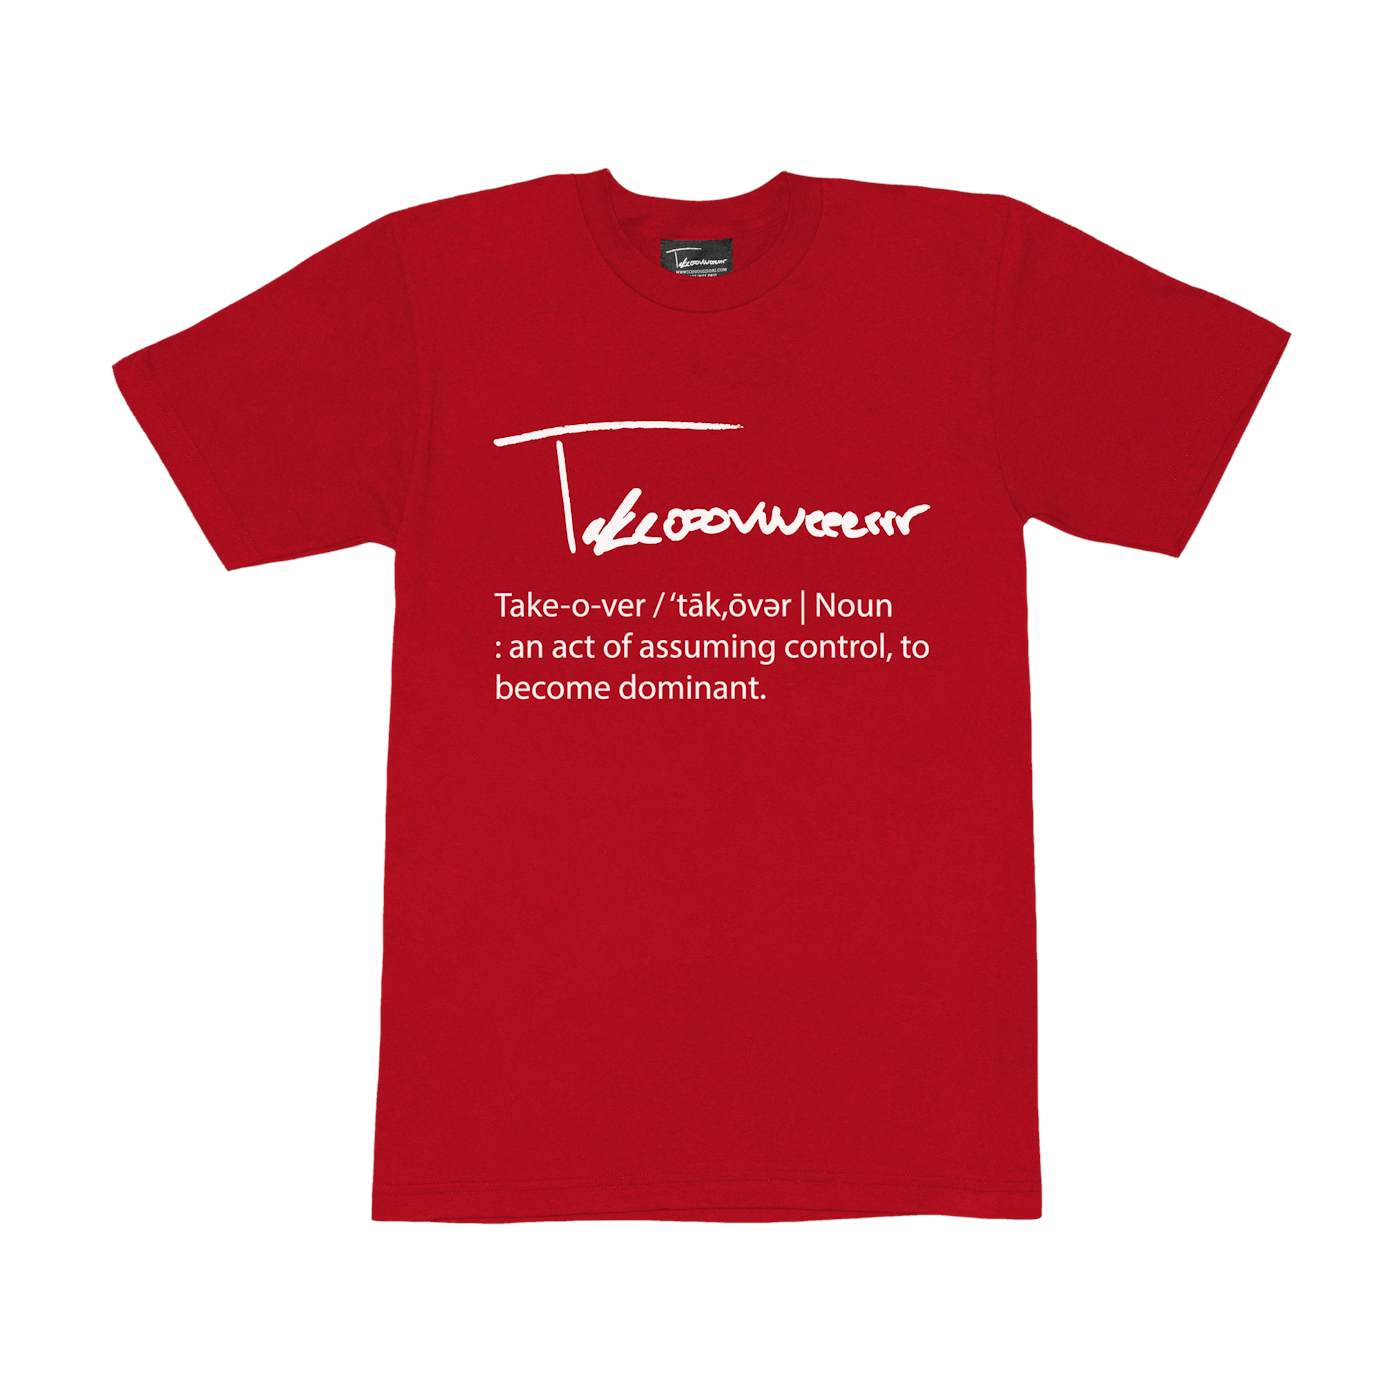 Taylor J Takeover Definition T-Shirt (Red/White)